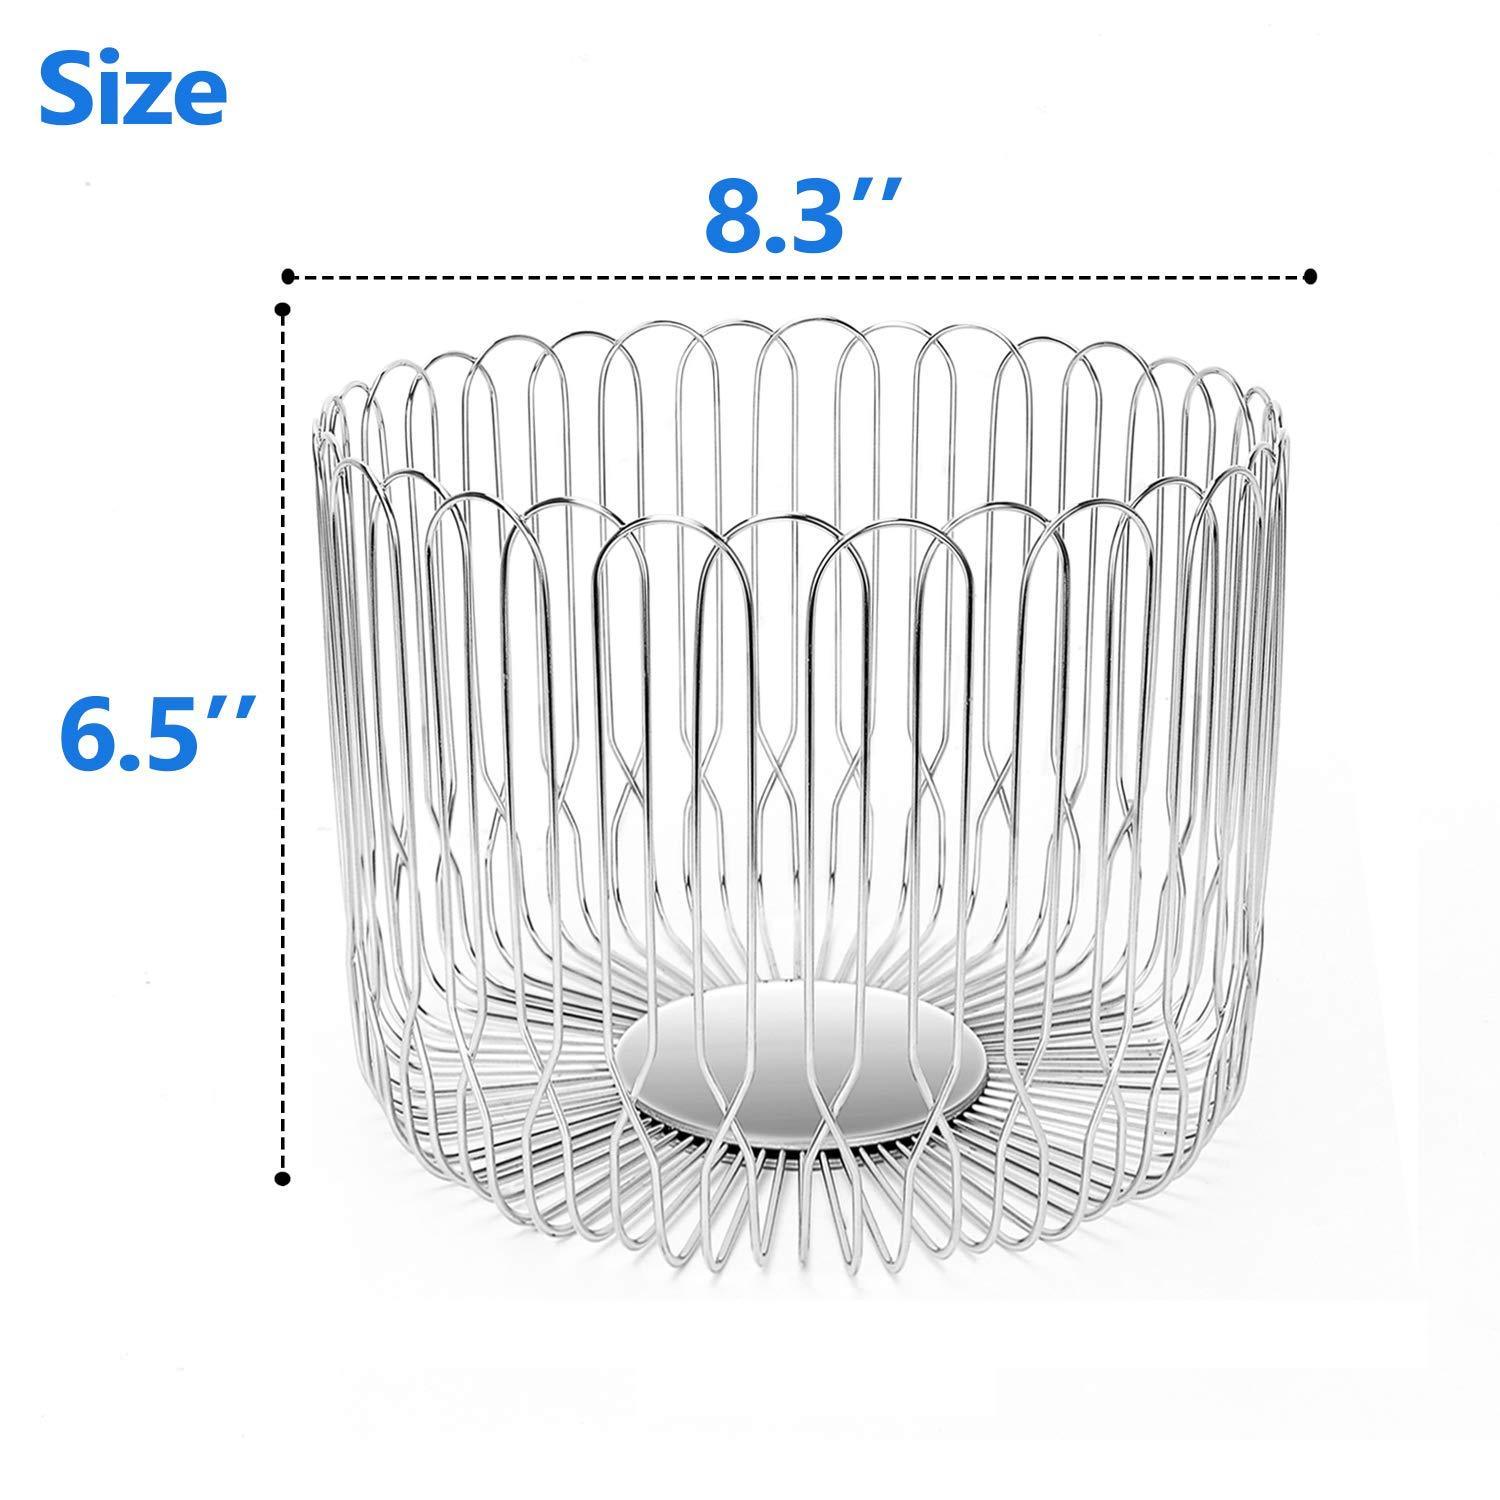 Order now fruit basket bowl stainless steel large wire fruit storage basket with bread for kitchen counter lanejoy